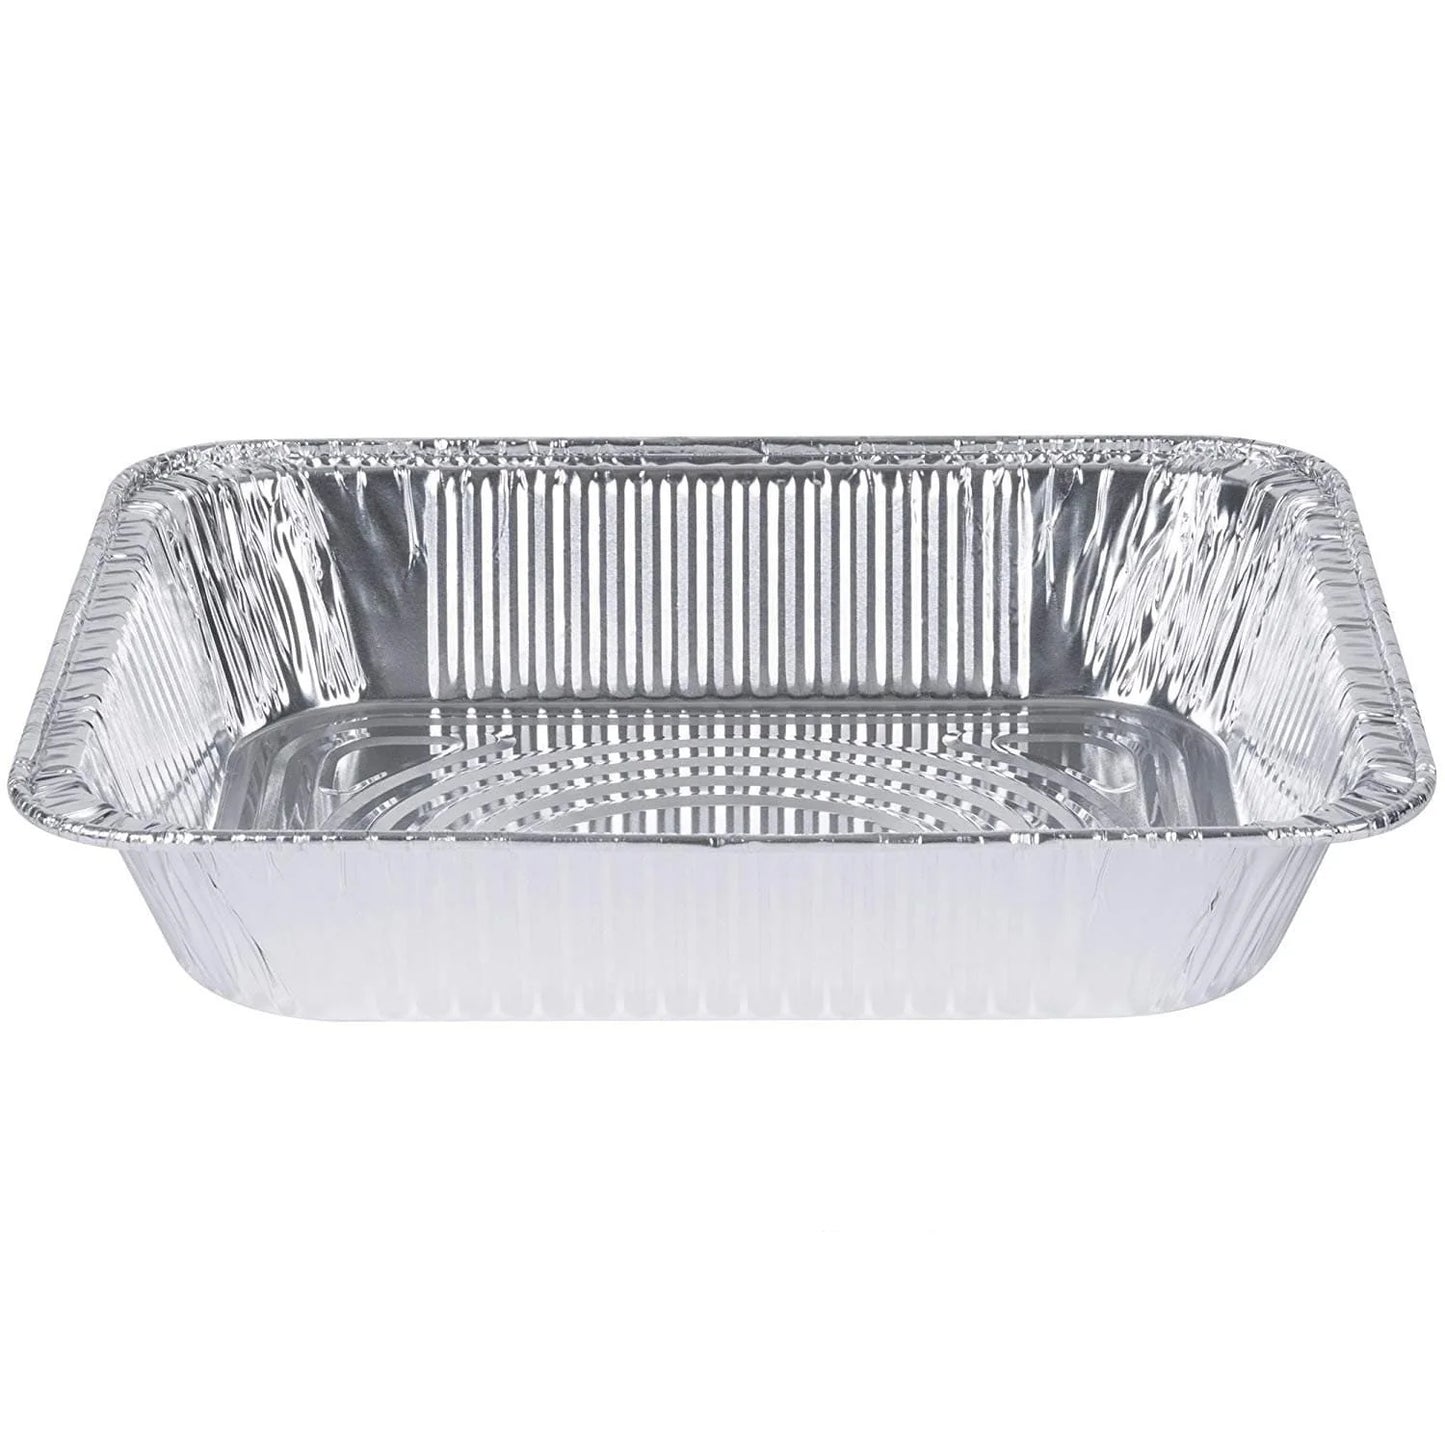 Disposable Aluminum Foil Pan 1/2 Size Deep Pan Heavy Weight 9' x 13" Disposable Nicole Collection   